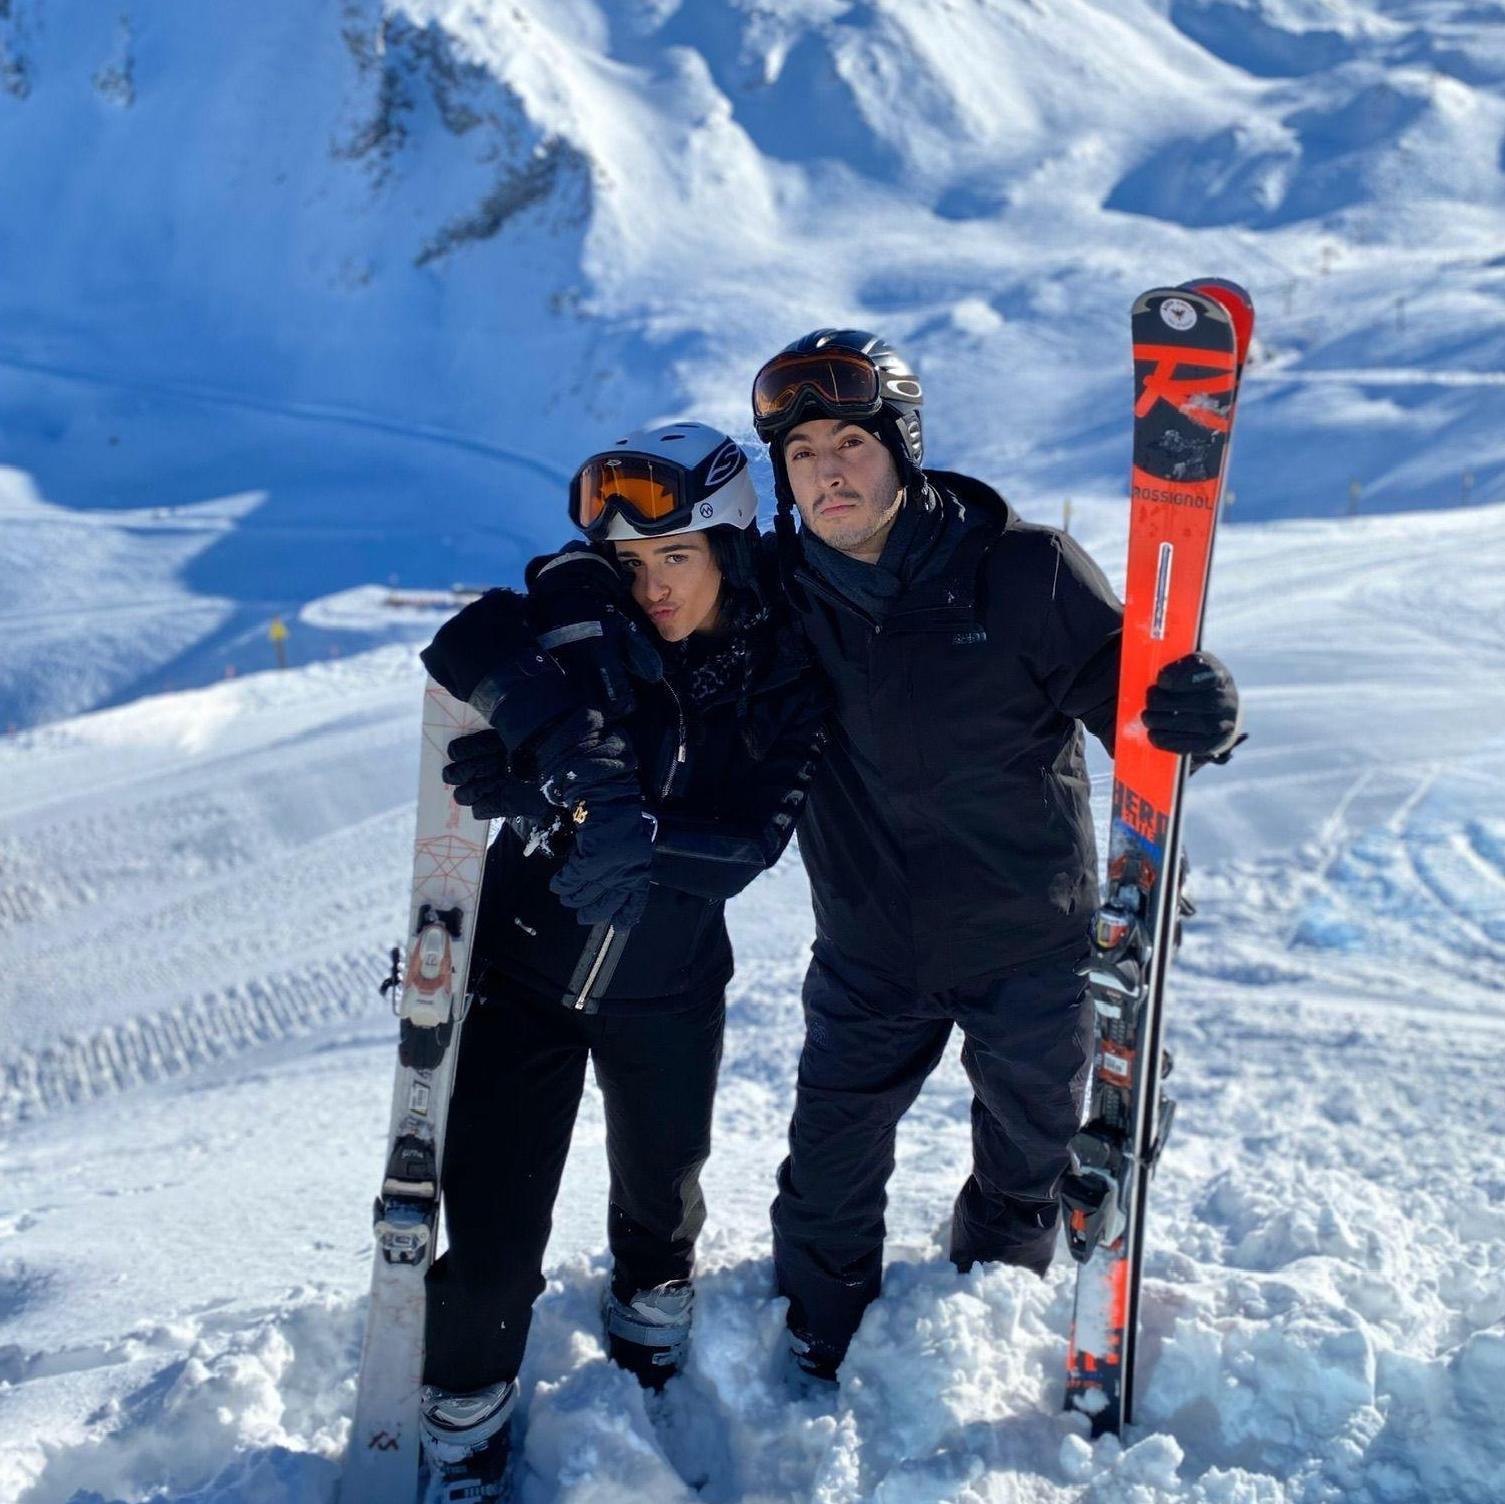 Our first trip abroad together & Olivia's first time ever skiing - Val D'Isère in 2019.